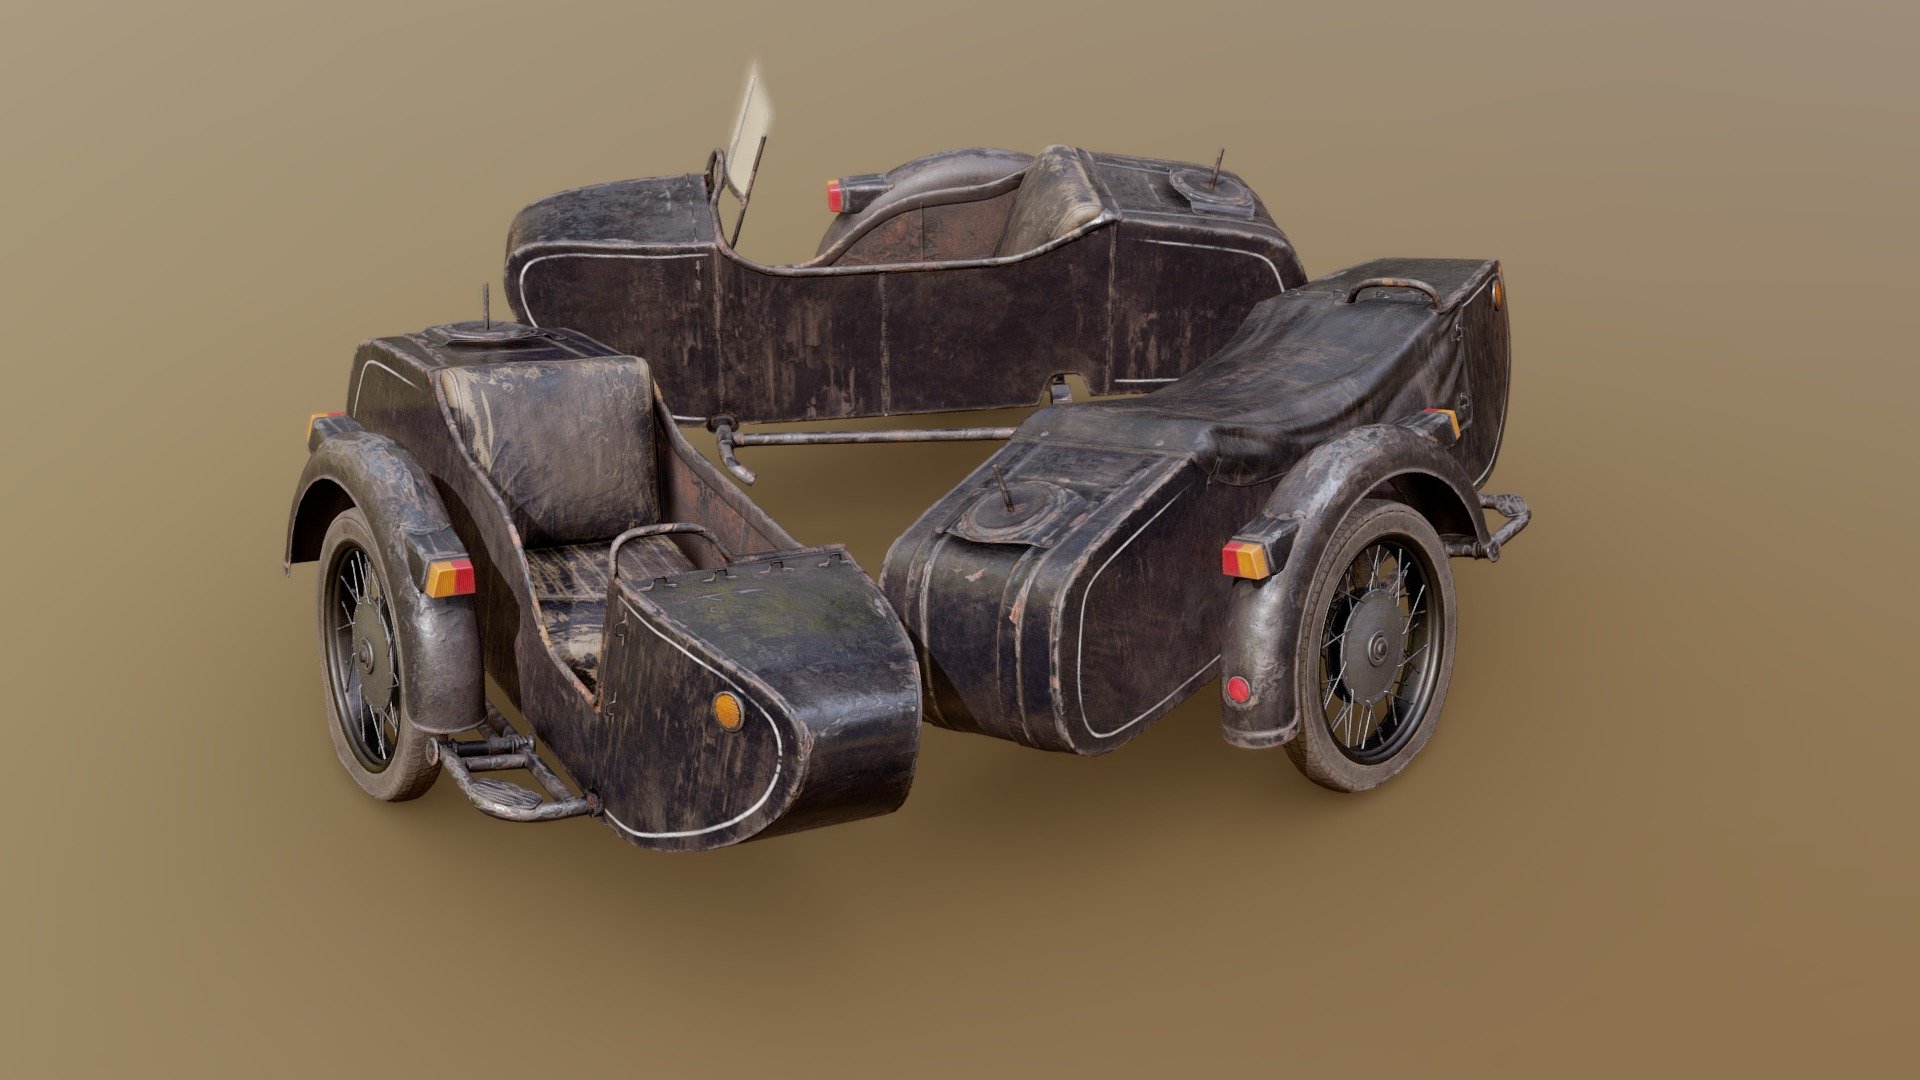 Gameready 3D model of Dnepr motorcycle sidecar. Modeling is done in 3Ds Max and texturing in Substance Painter 3d model